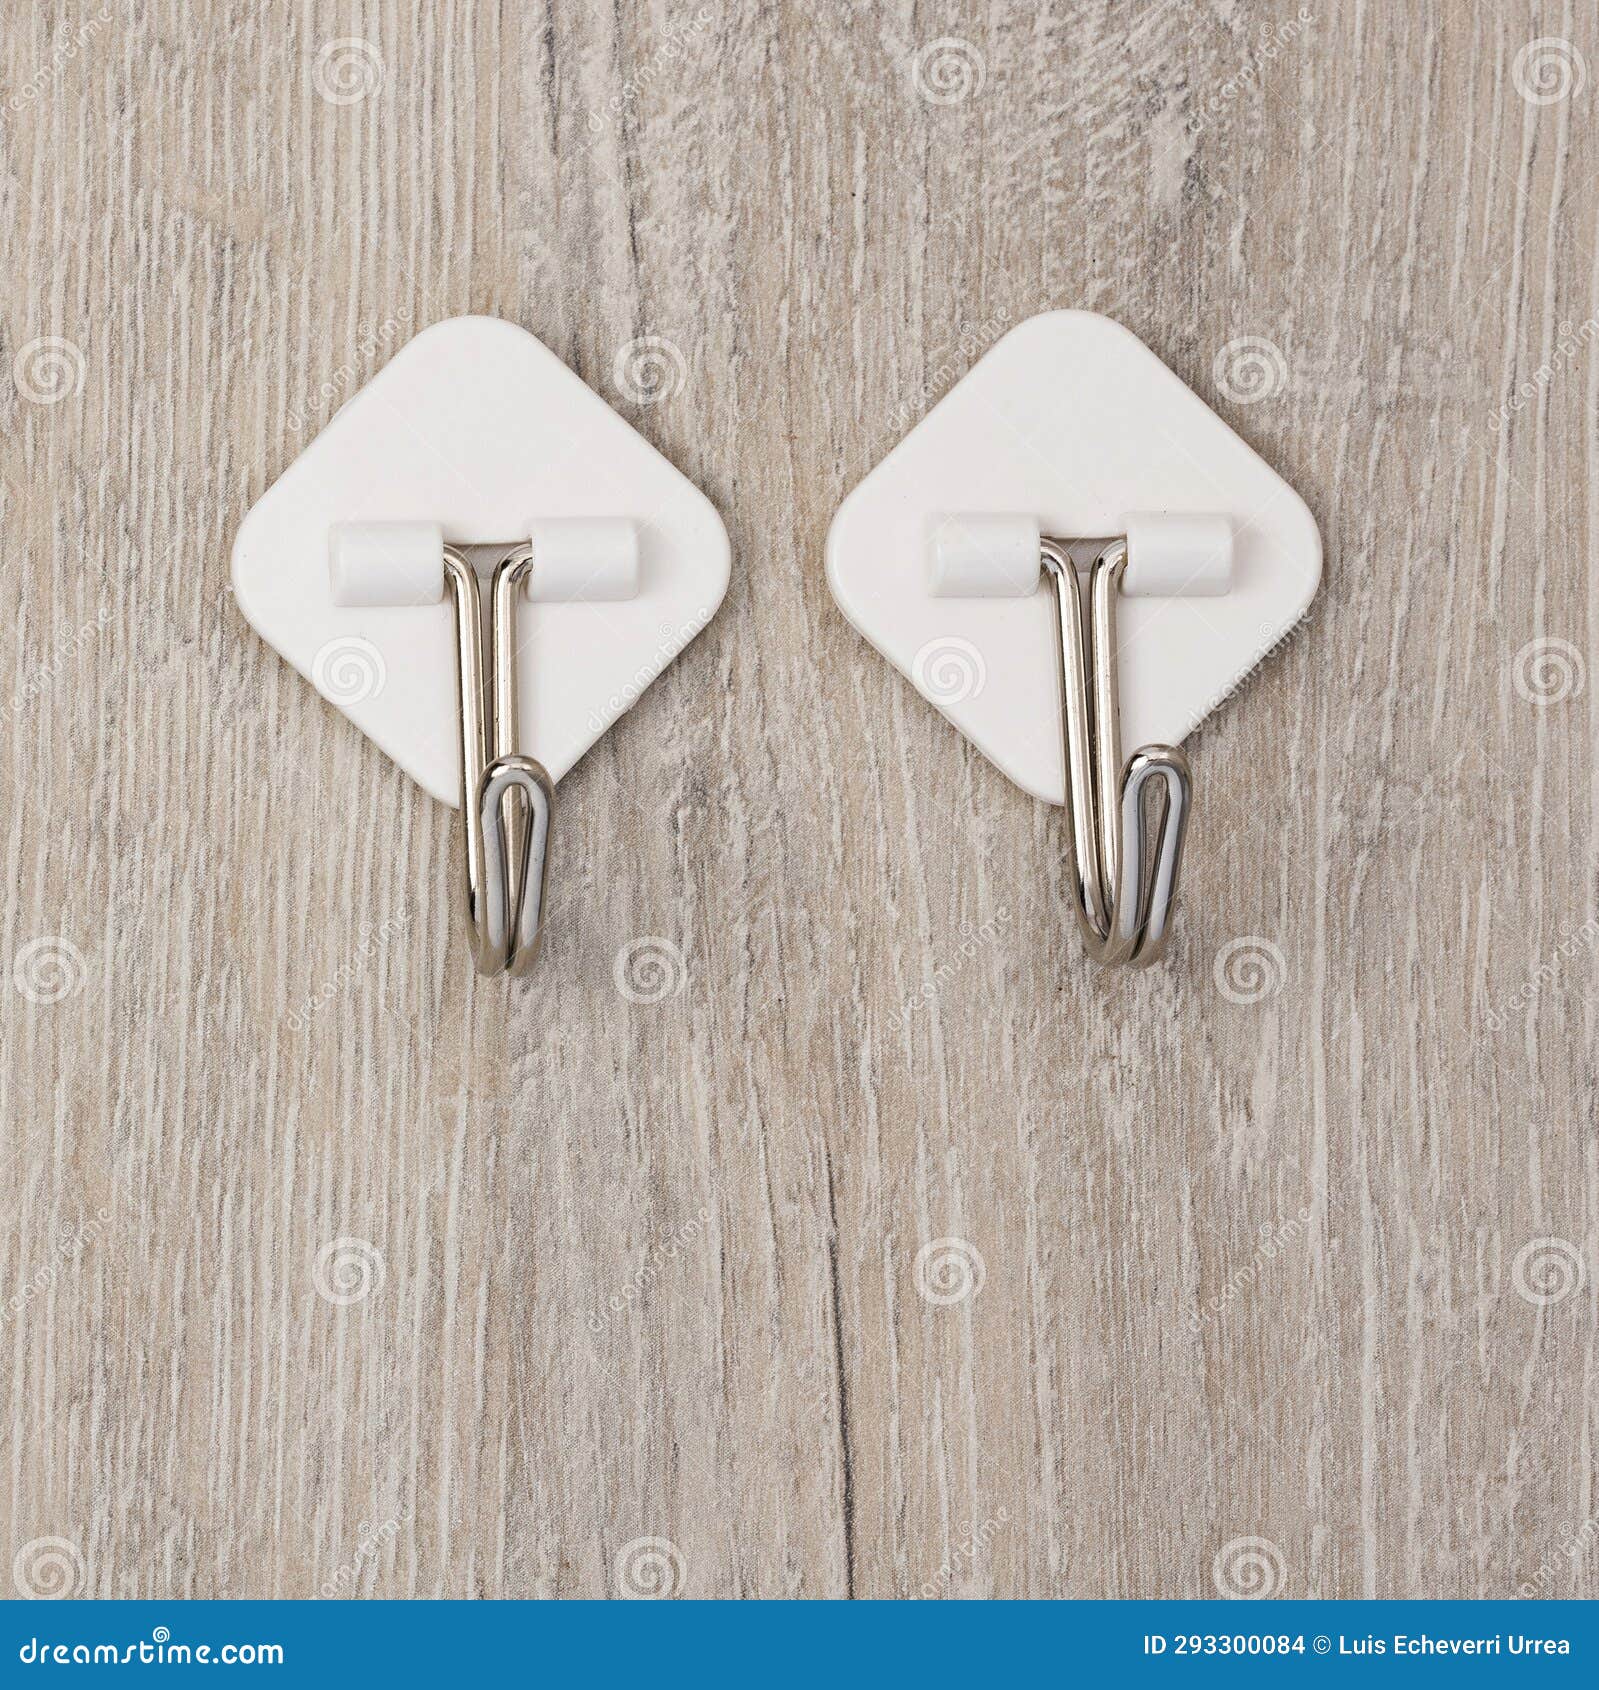 Two Plastic Adhesive Utility Wall Fixed Hooks with Metal Hooks for Hanging  Clothes Stock Photo - Image of hanging, text: 293300084